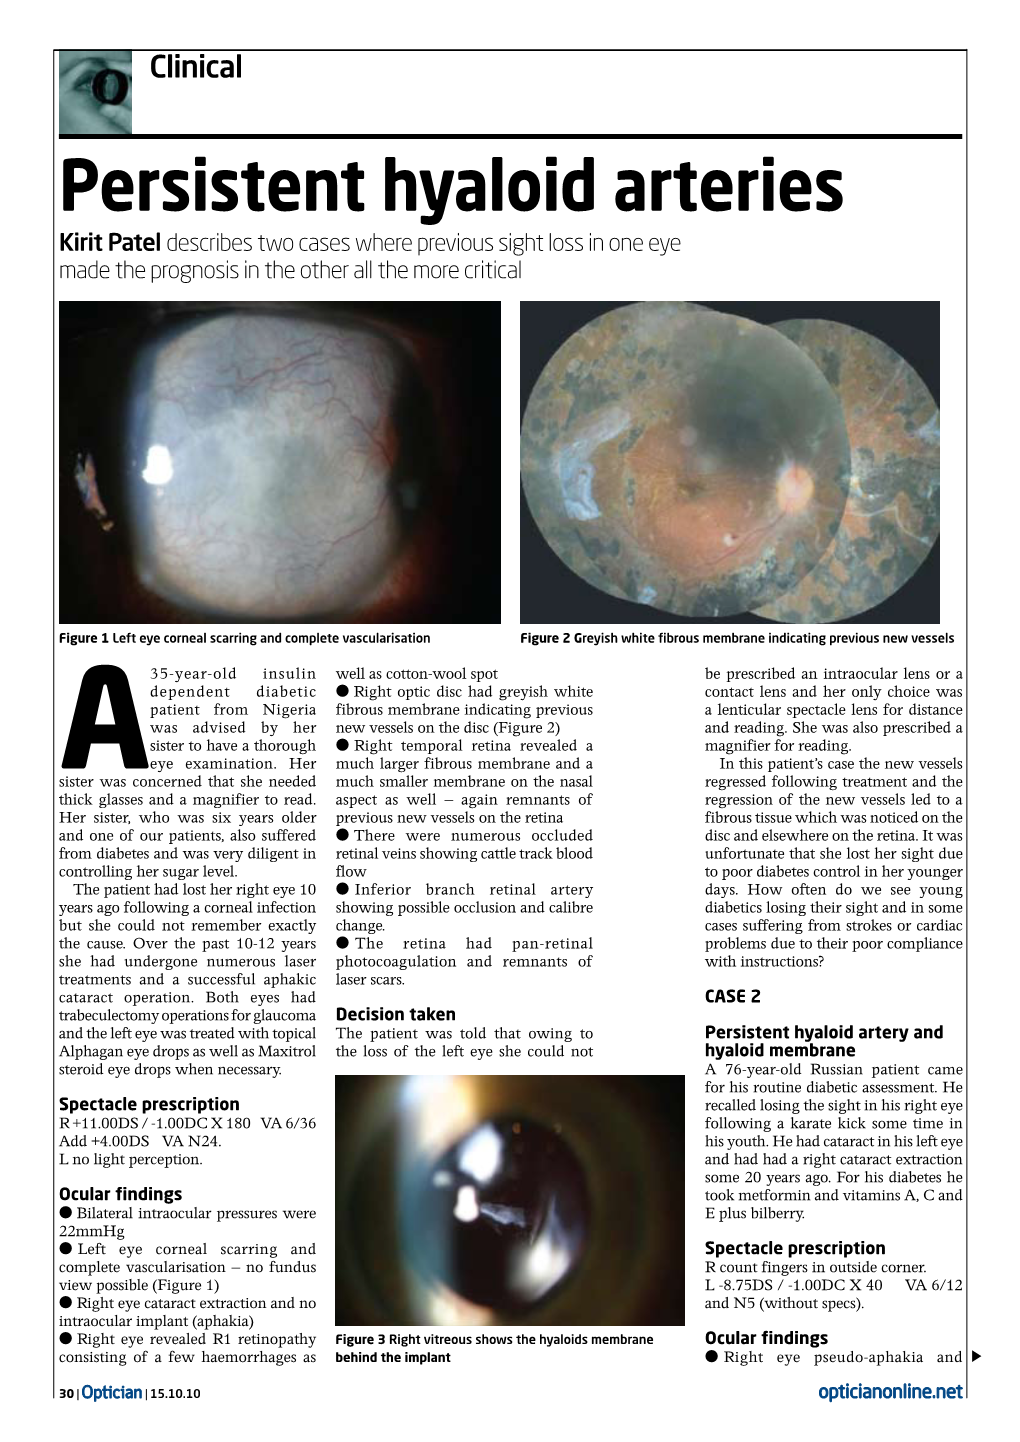 Persistent Hyaloid Arteries Kirit Patel Describes Two Cases Where Previous Sight Loss in One Eye Made the Prognosis in the Other All the More Critical